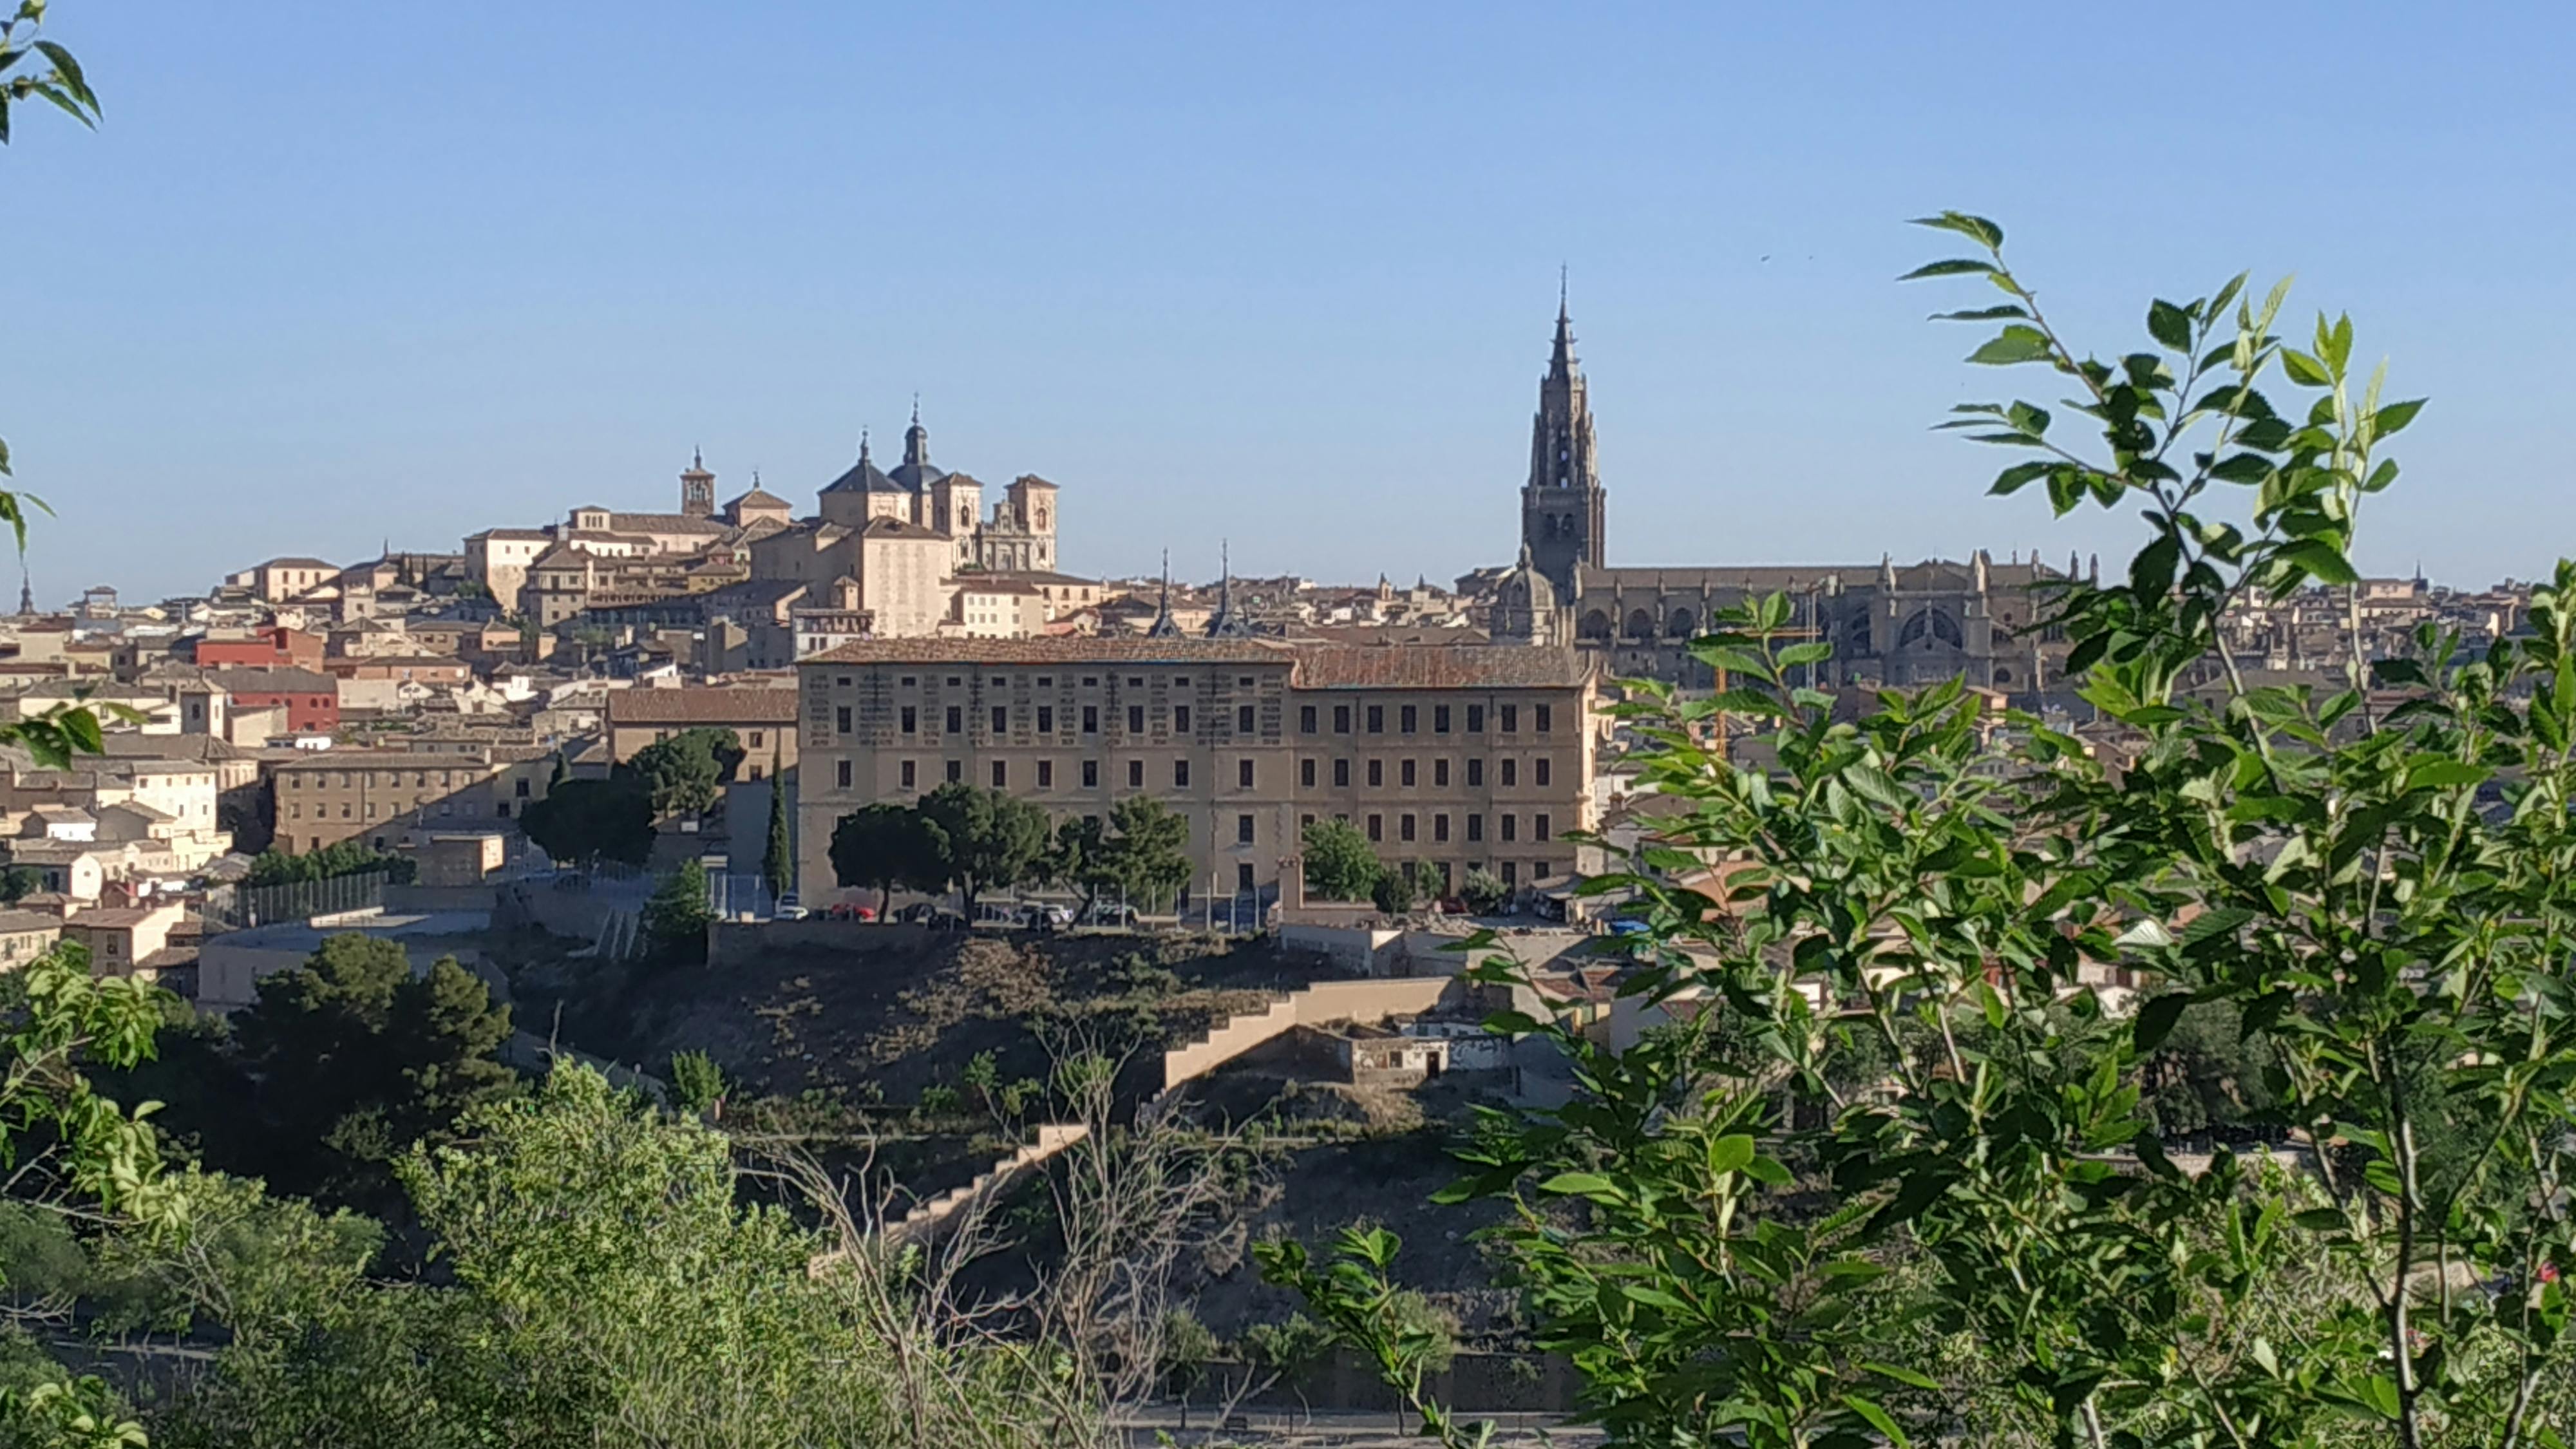 Full day trip to Toledo by bus from Madrid Musement